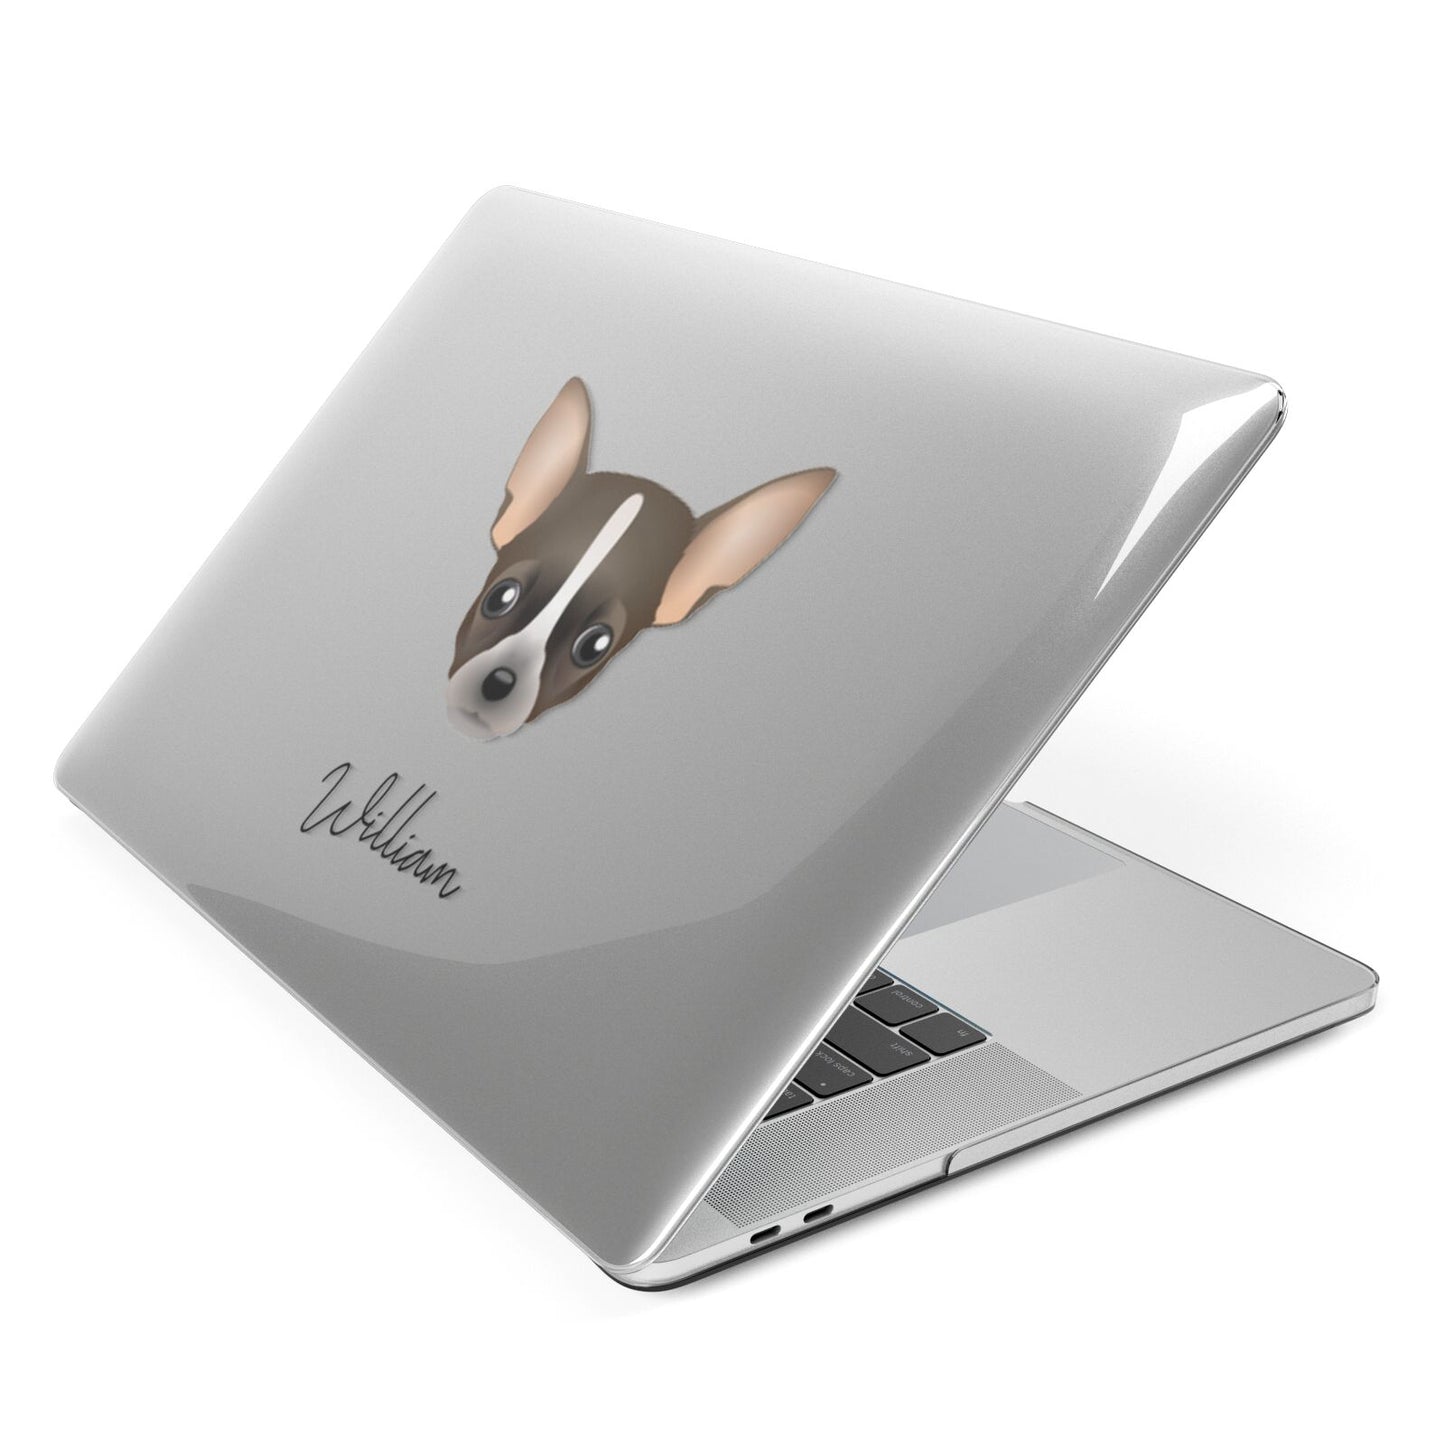 Chihuahua Personalised Apple MacBook Case Side View